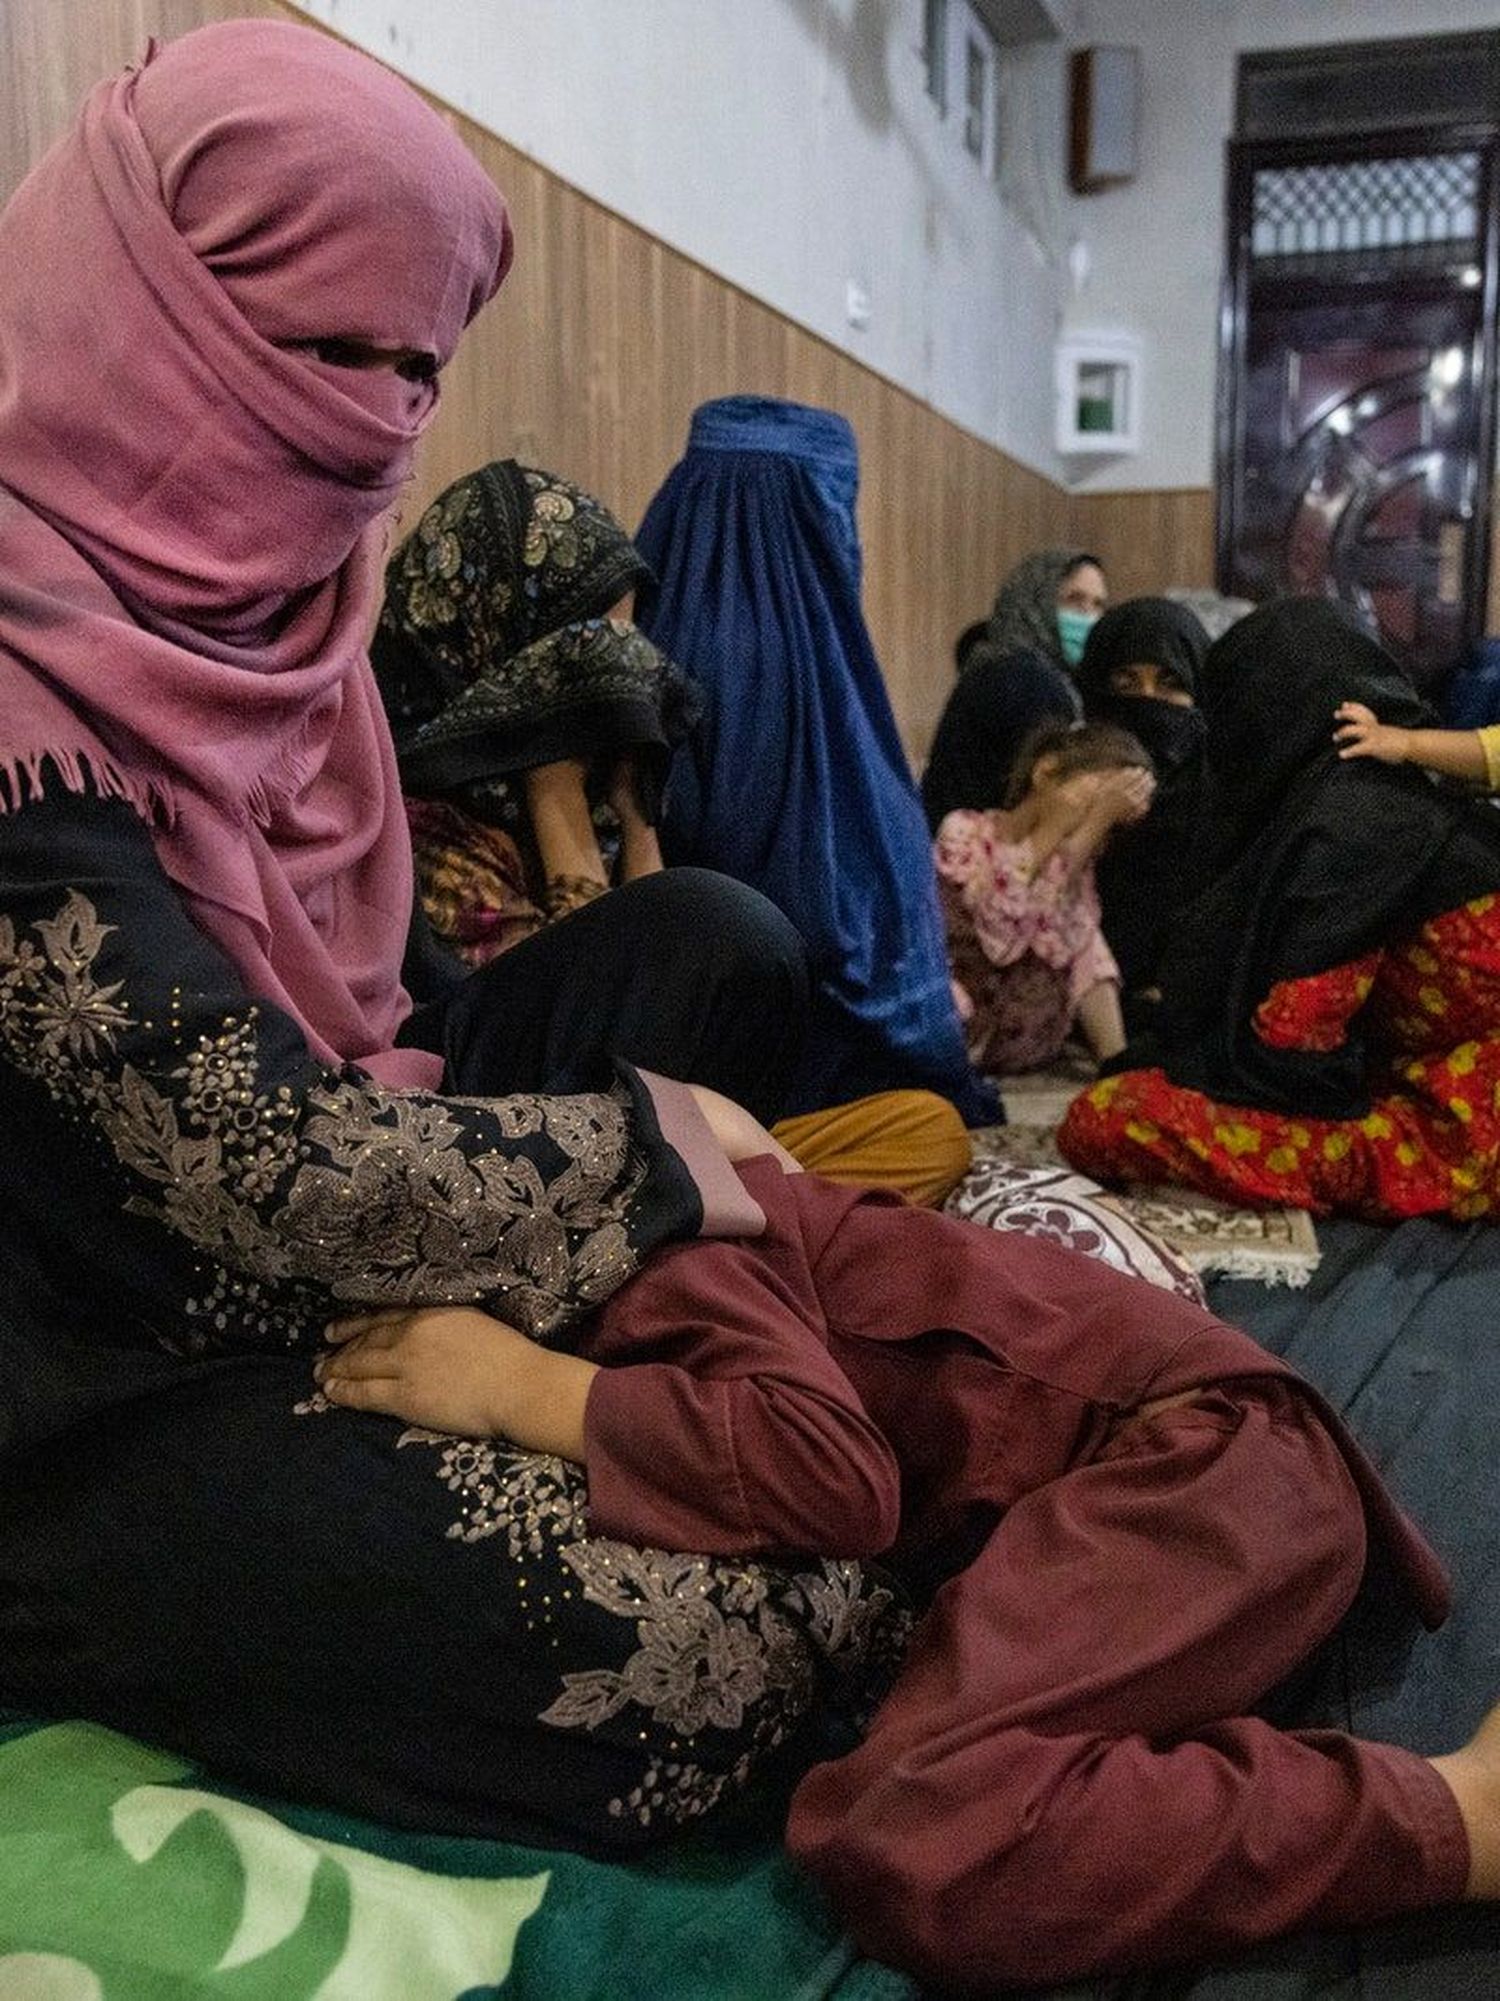 Displaced women and children sheltering at a mosque in Kabul, Afghanistan.